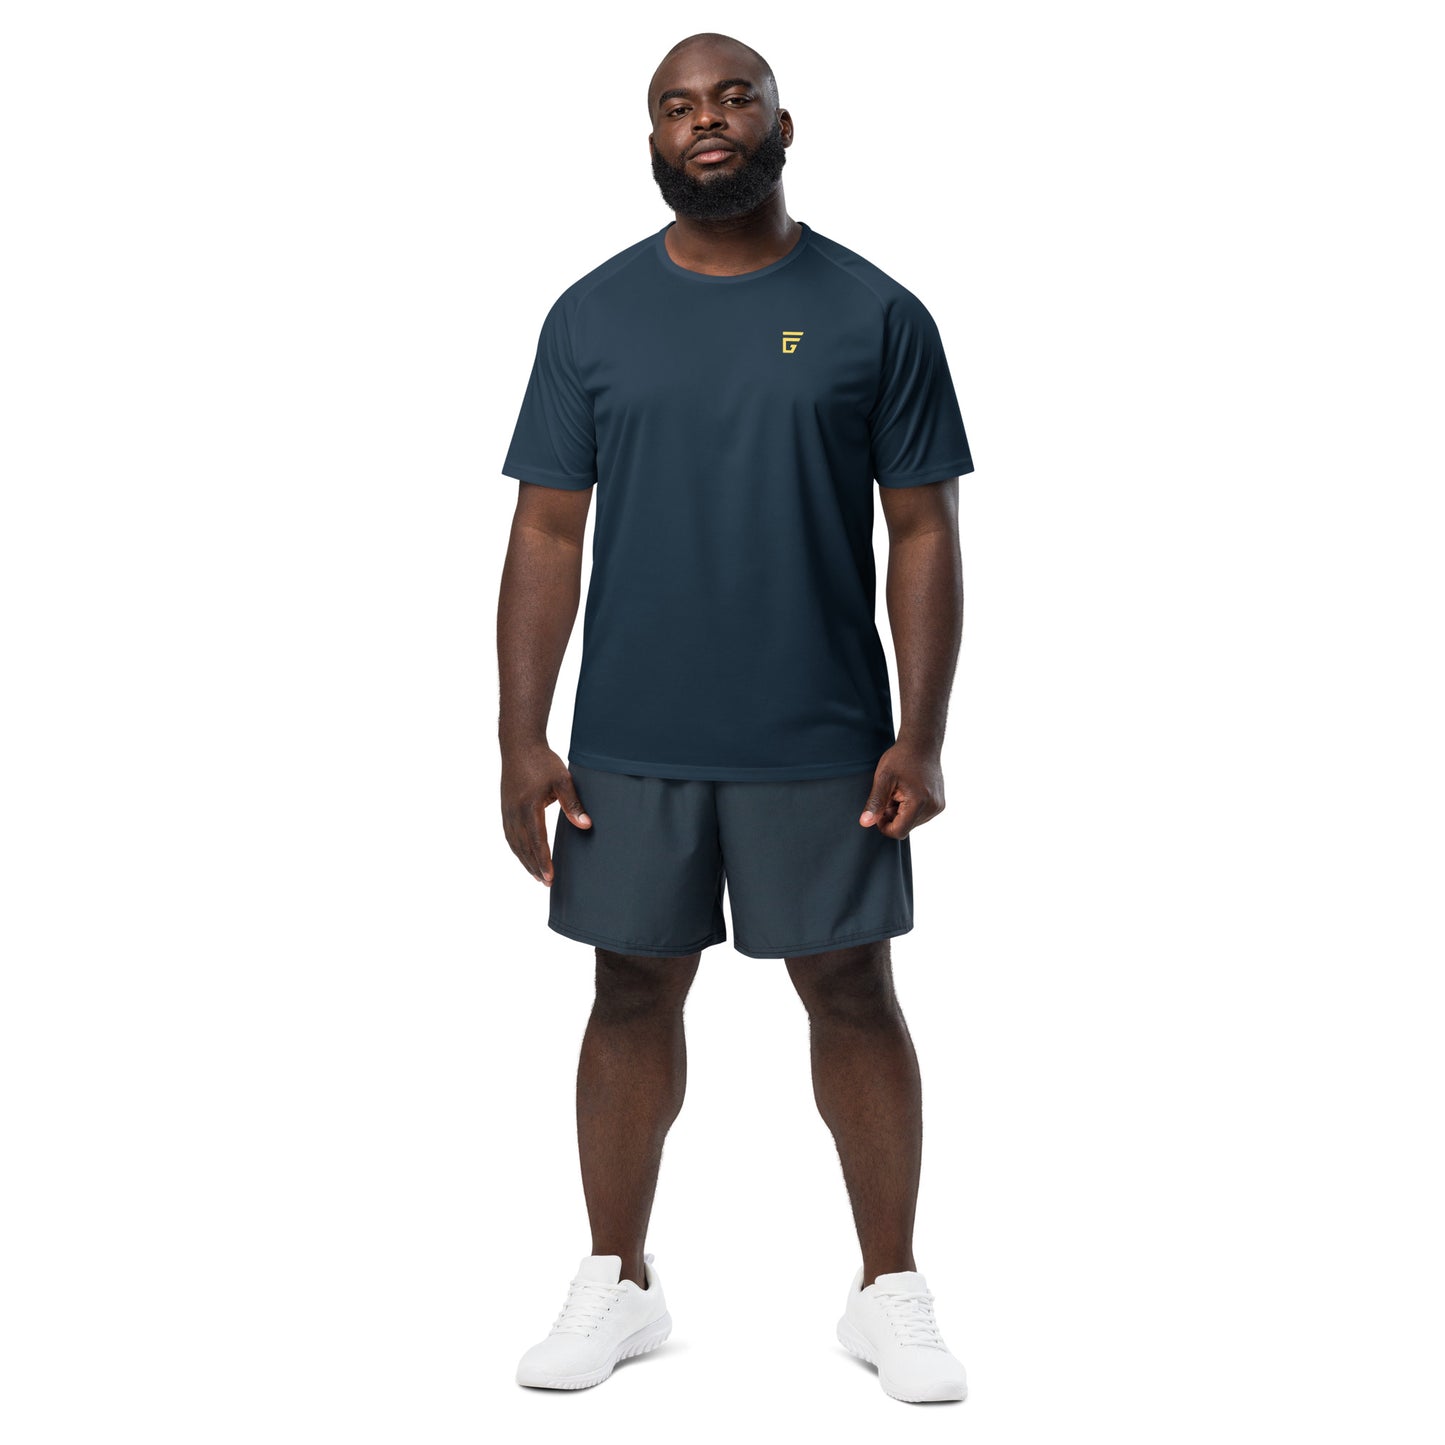 G-FORCE FITNESS CLUB SPORTS JERSEY